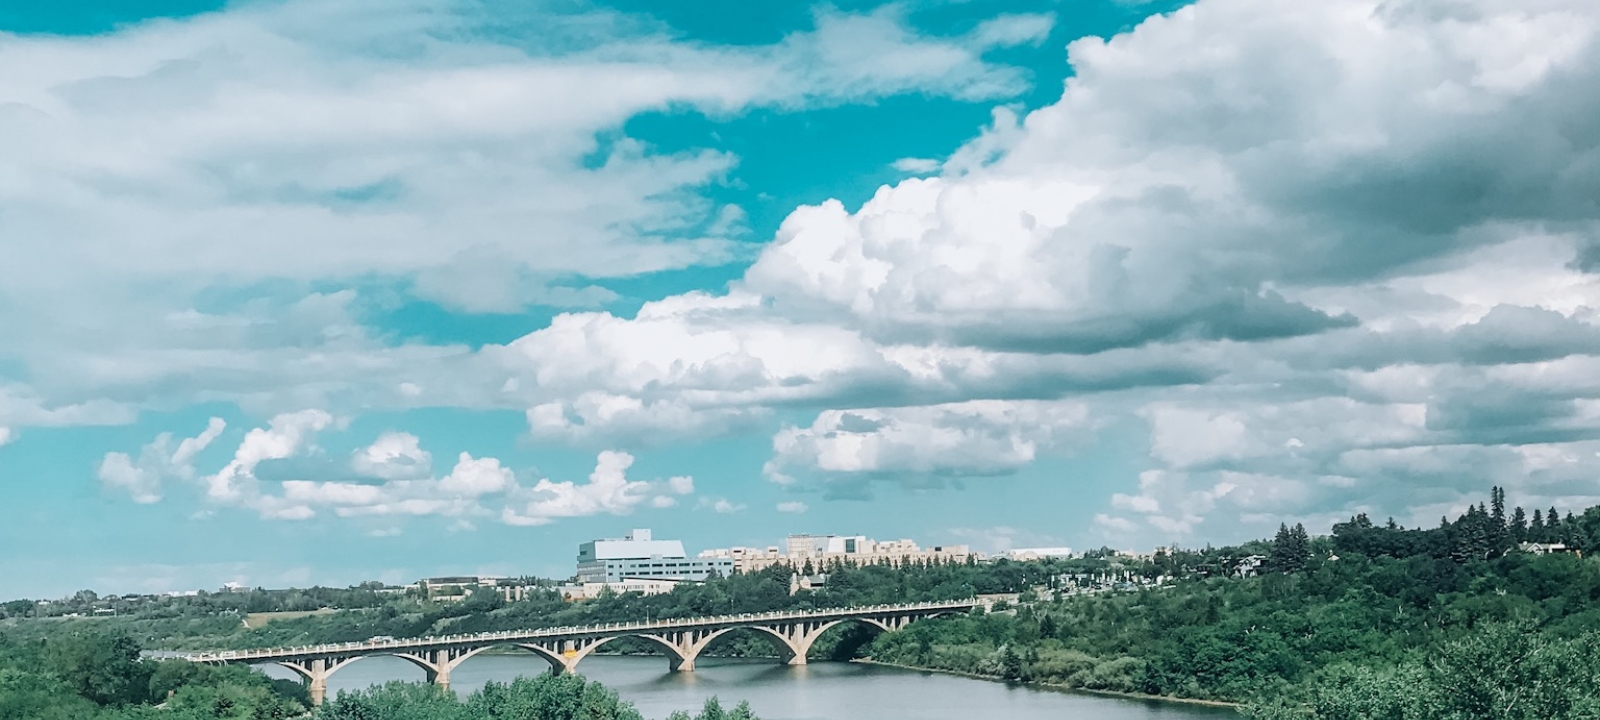 The First Timer's Guide to Saskatoon